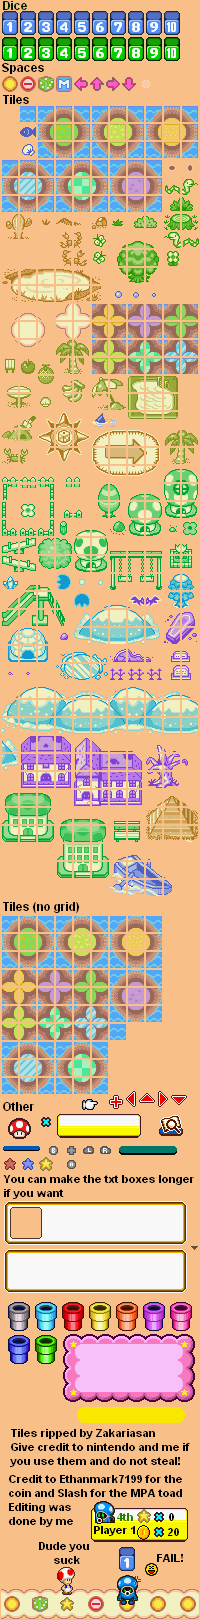 Tileset and Miscellaneous